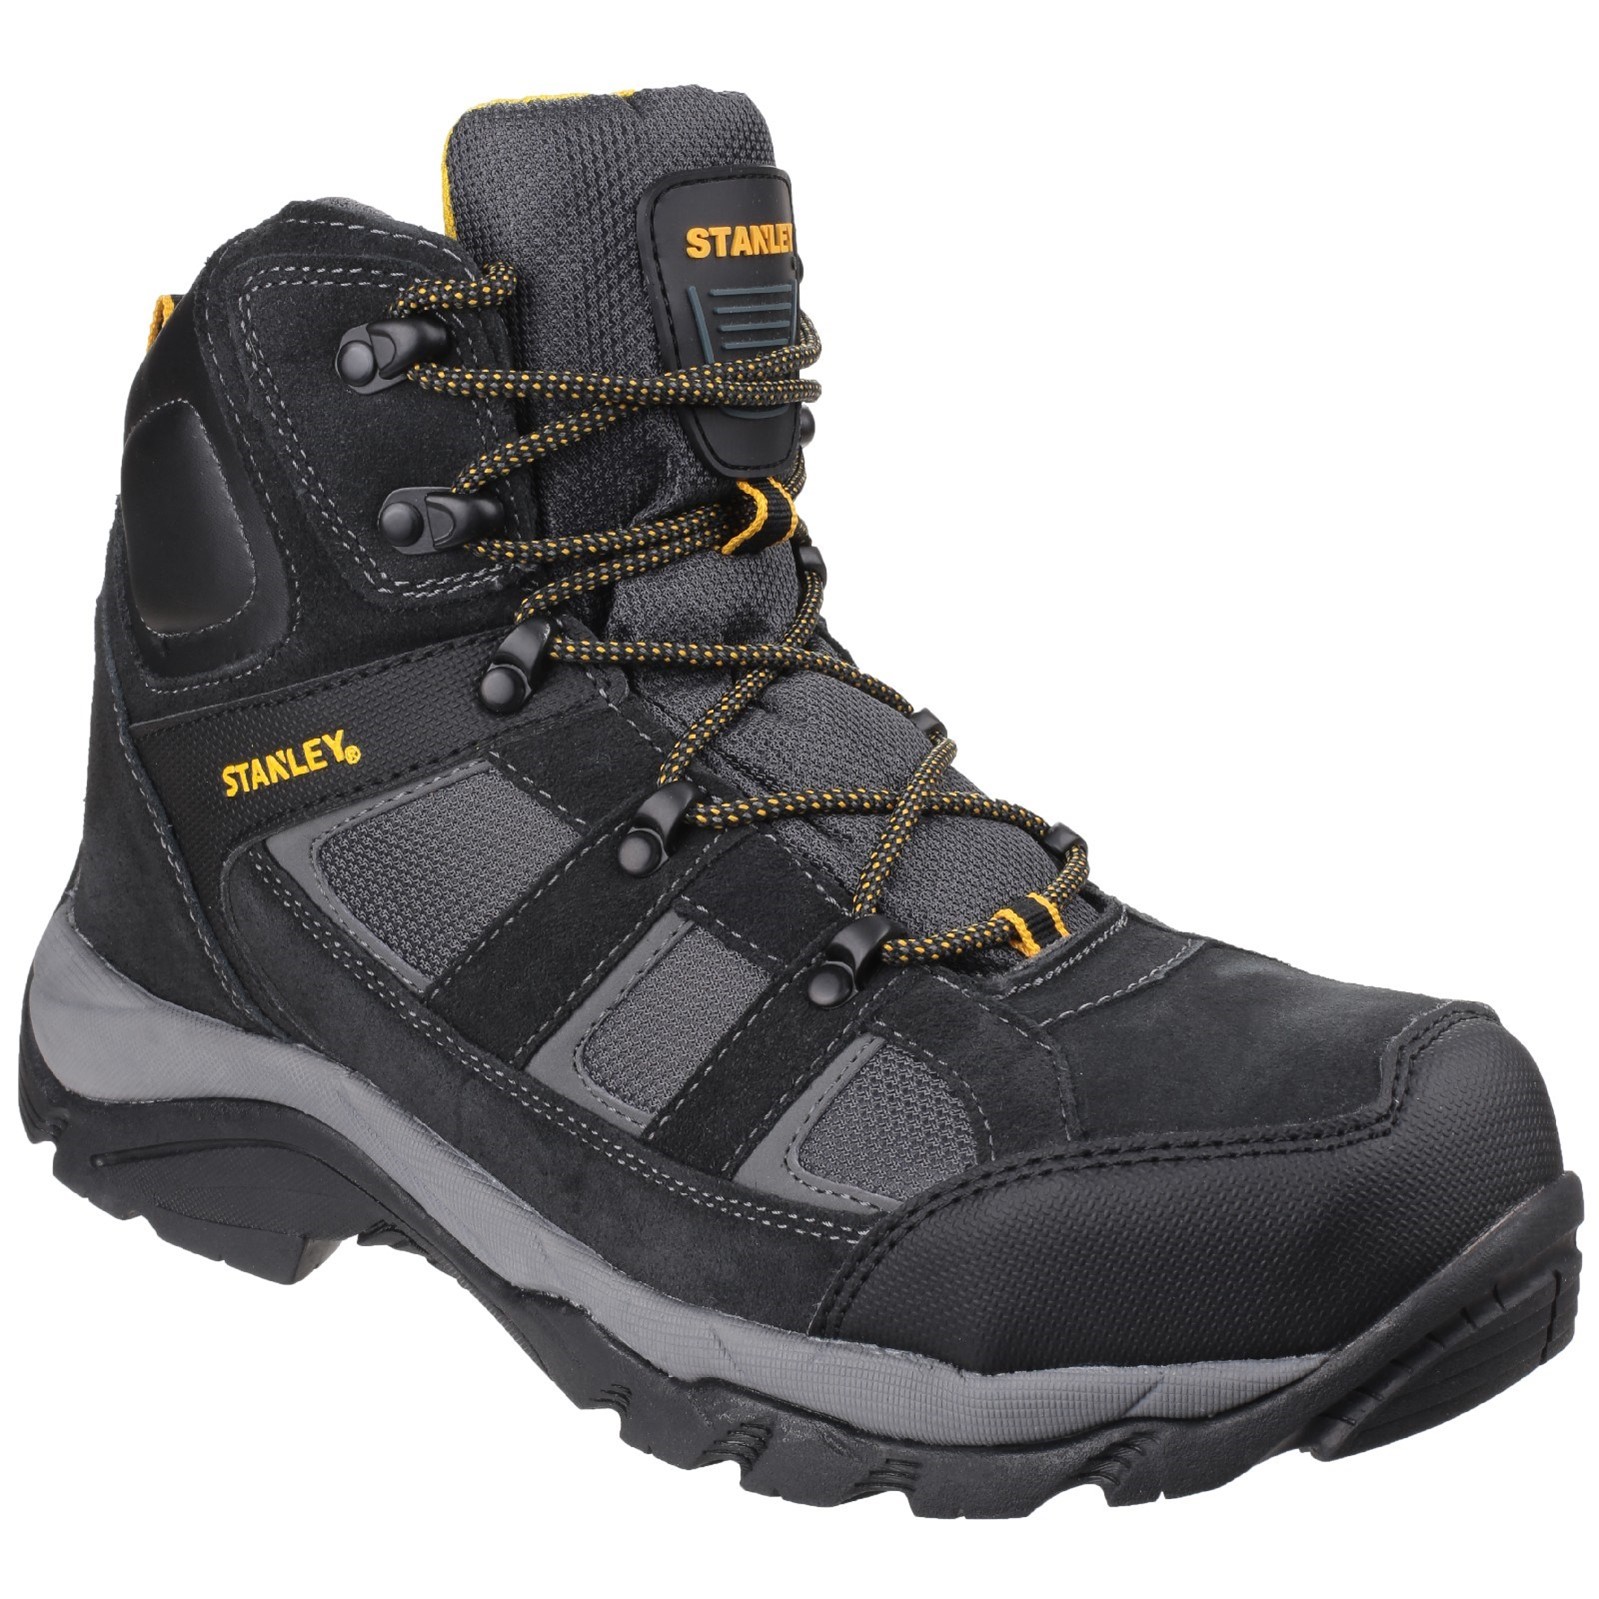 Stanley Melrose Safety Boot